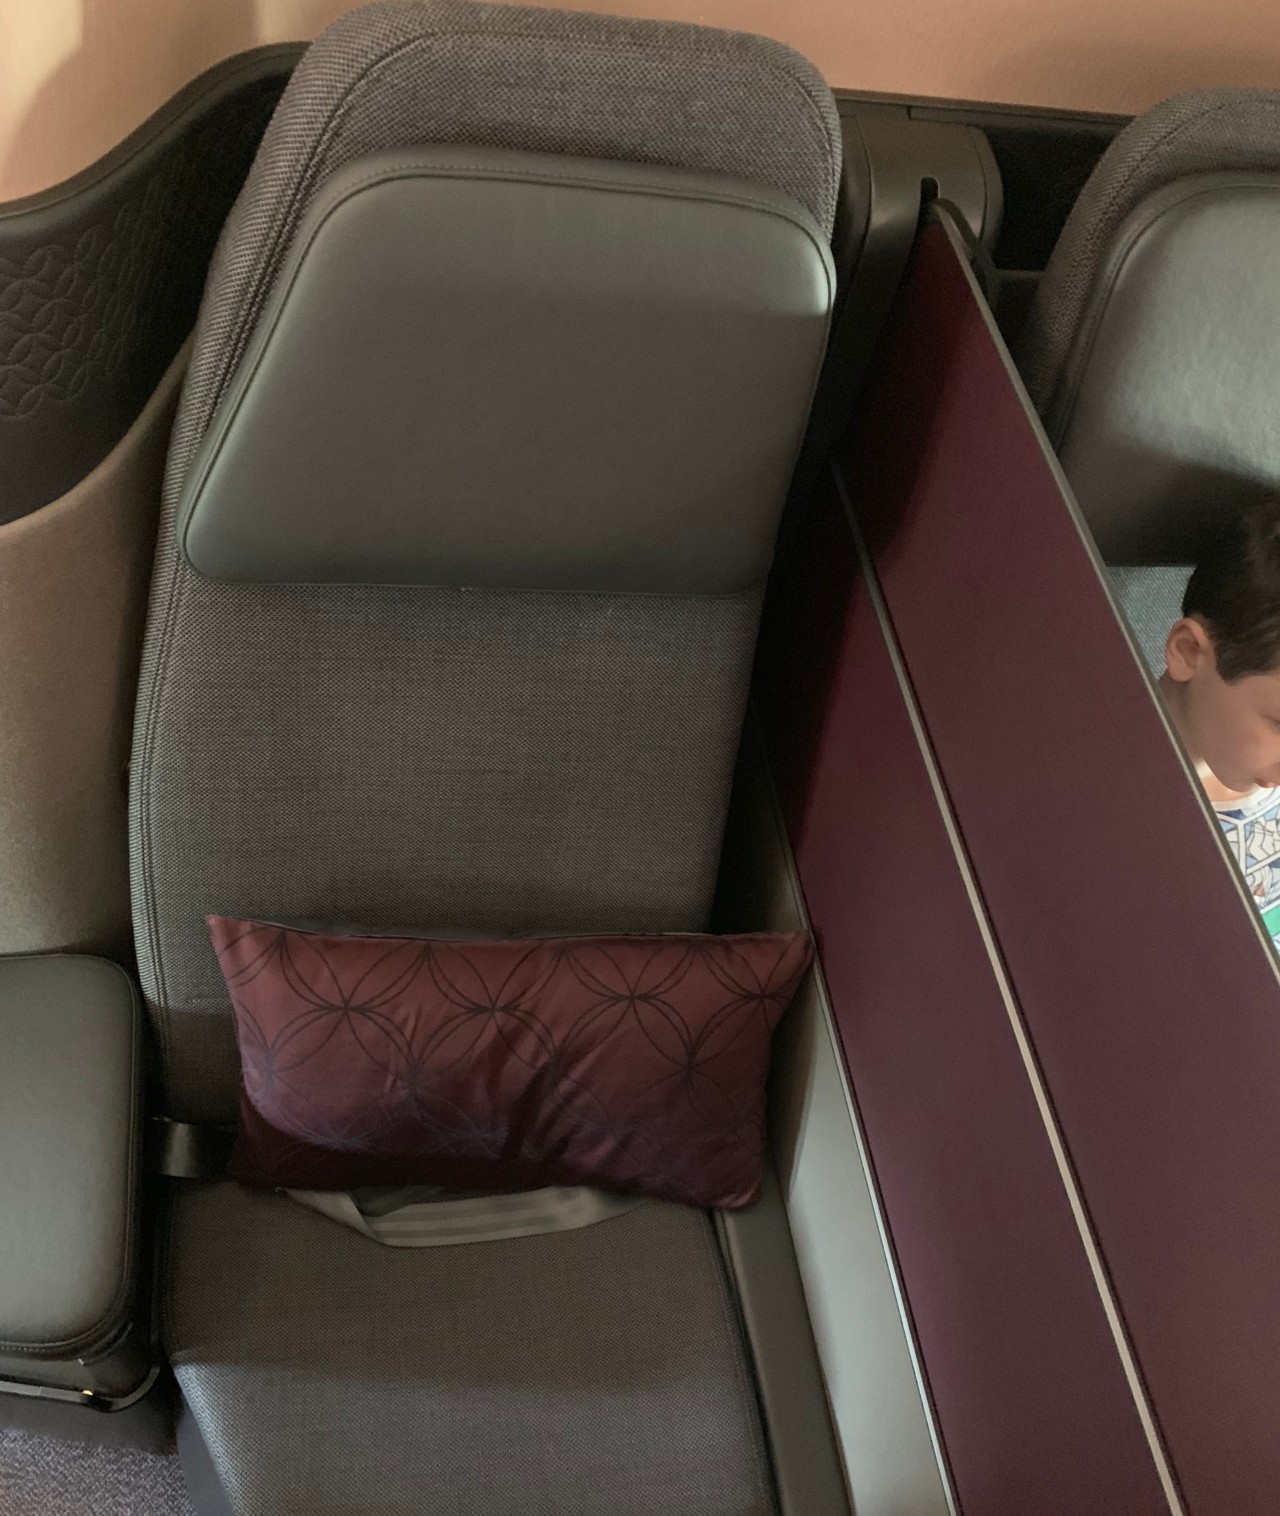 Qatar Qsuites Review 777: Privacy Divider